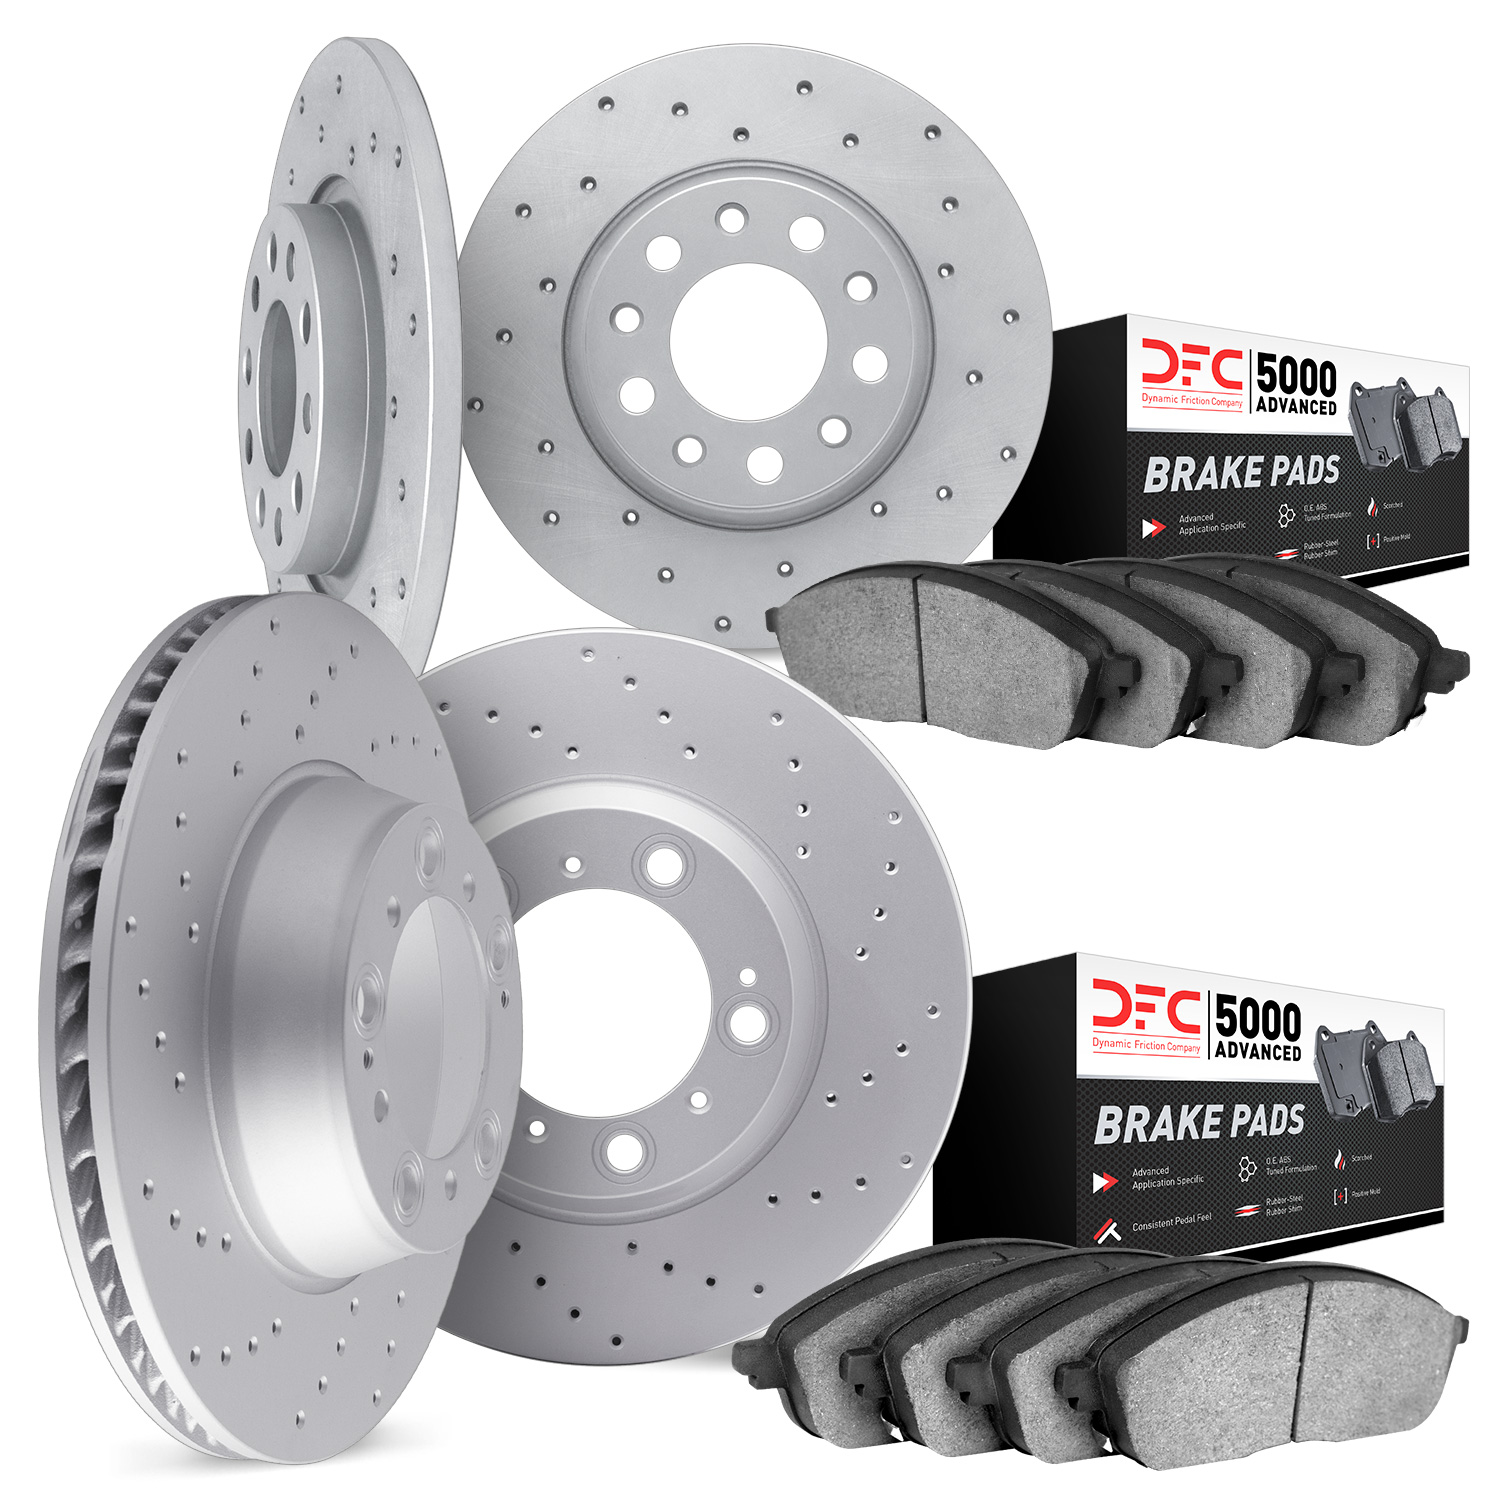 2704-59063 Geoperformance Drilled Brake Rotors with Active Performance Pads Kit, 2006-2007 Acura/Honda, Position: Front and Rear